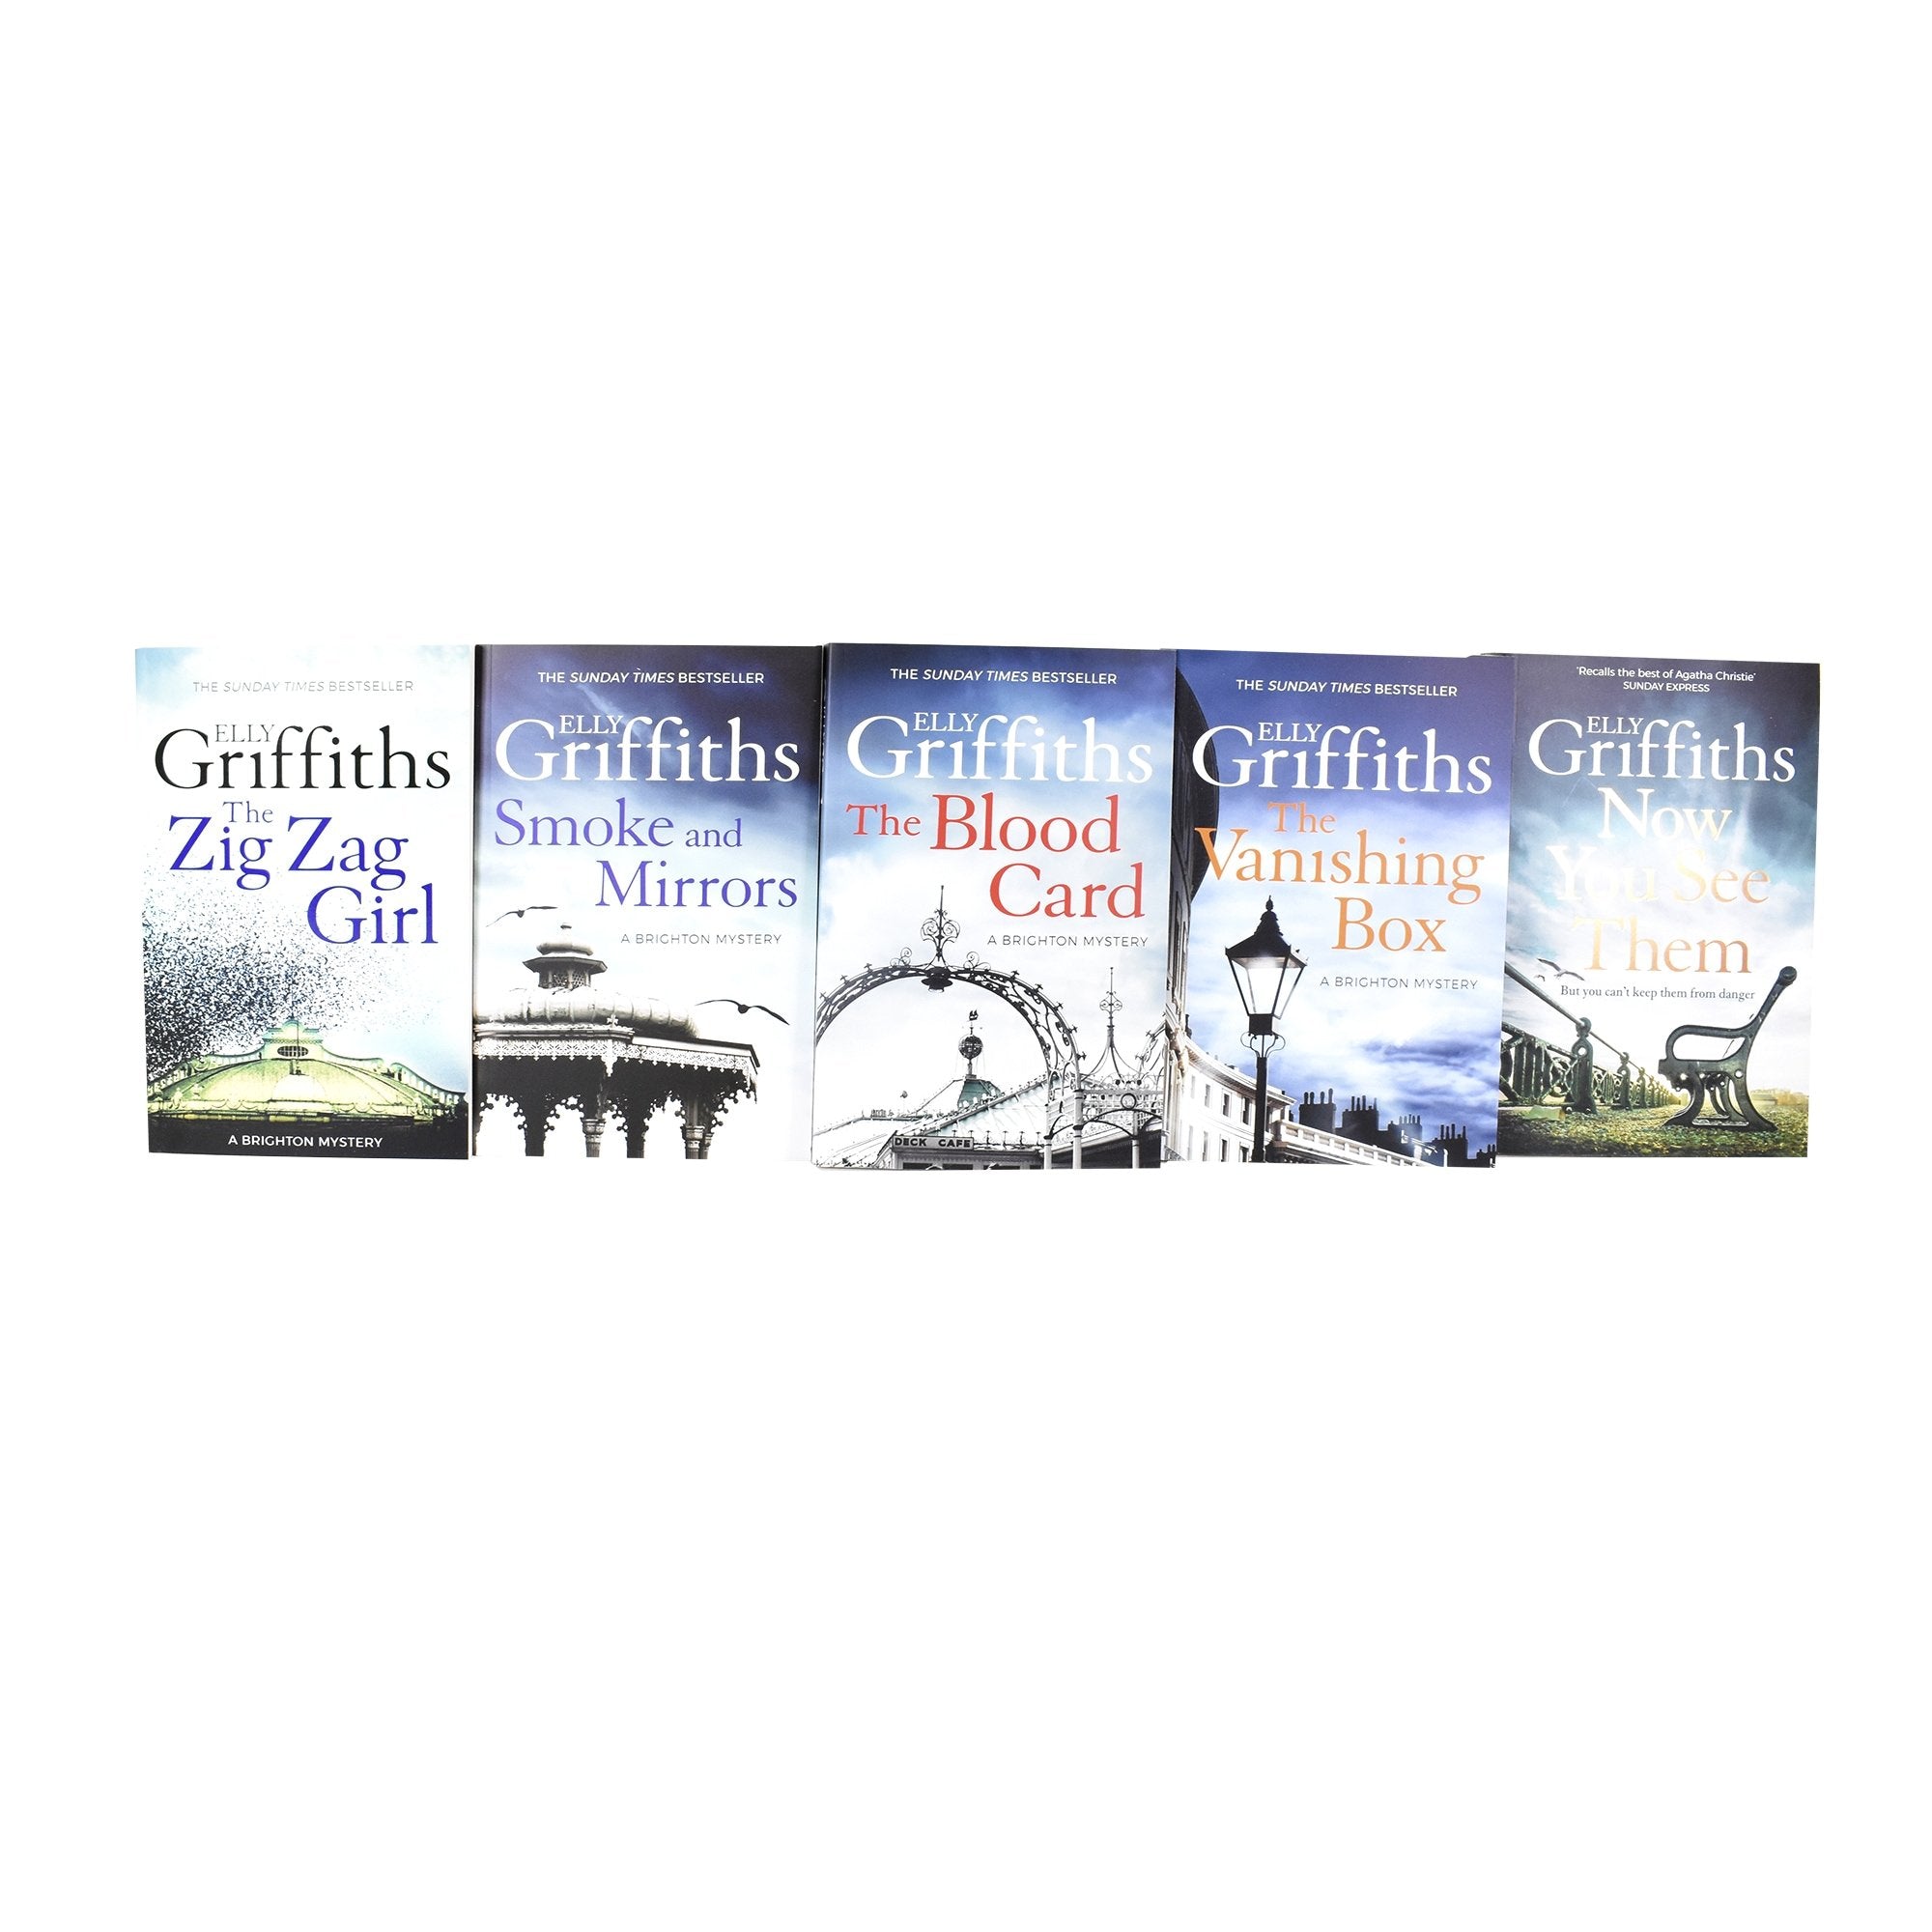 Brighton Mysteries Series 5 Books Adult Collection Paperback Set By Elly Griffiths - St Stephens Books